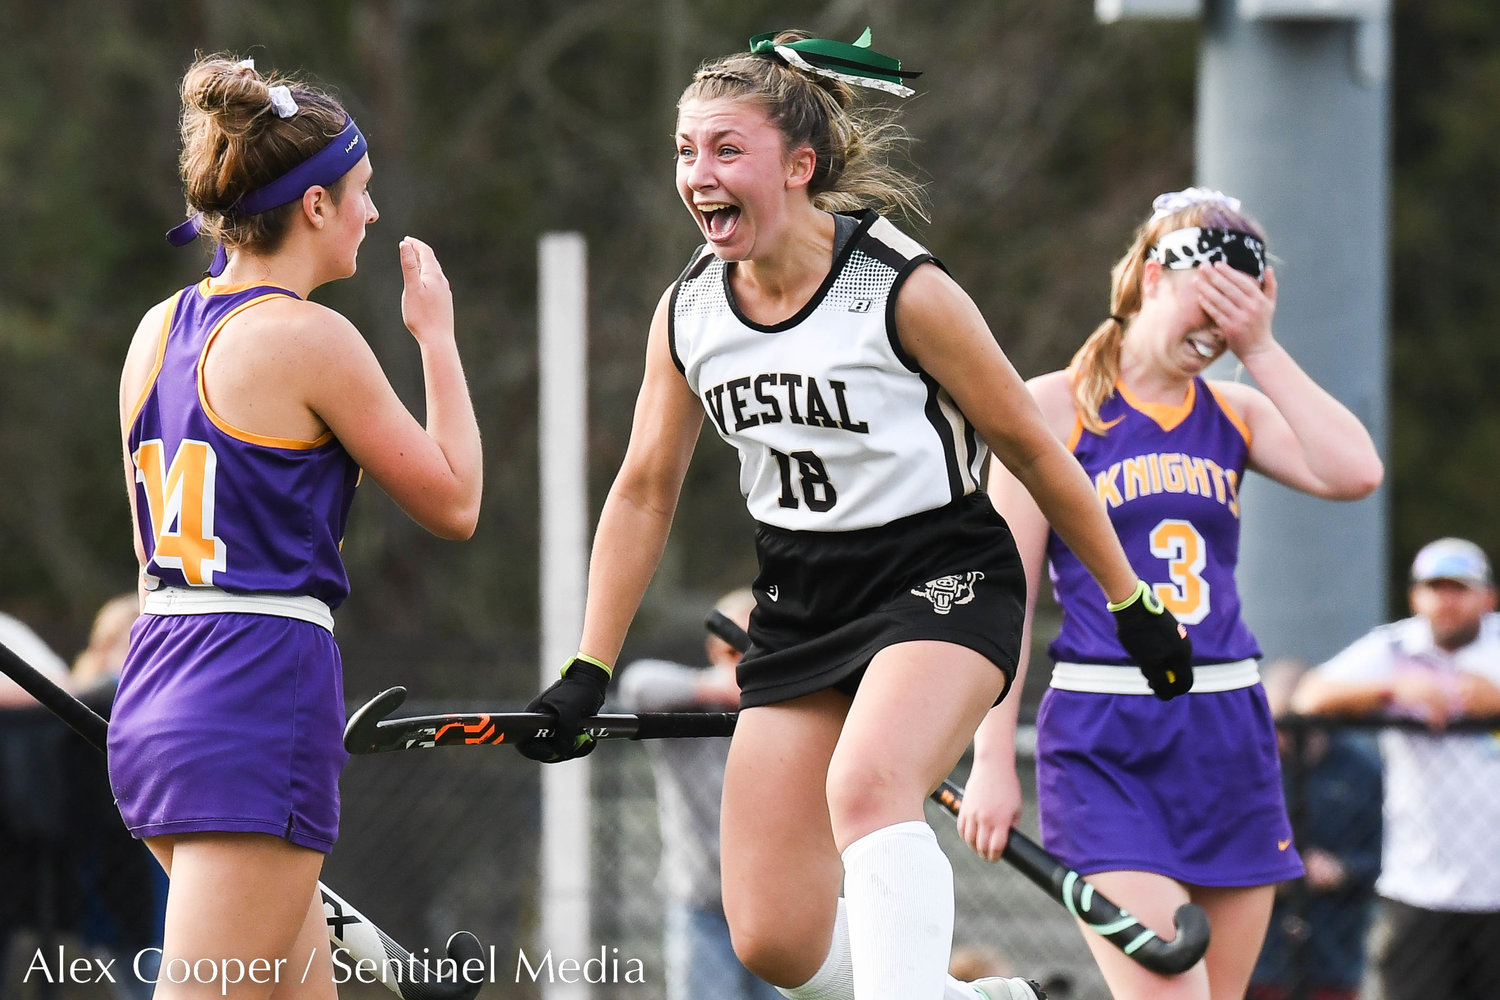 Holland Patent players Zoe Kelly (14) and teammate Michaela Cushman (3) react as Vestal player Adrienne Mayes, center, celebrates after beating the Golden Knights 2-1 in the Class B field hockey state regional on Saturday at Sidney High School.